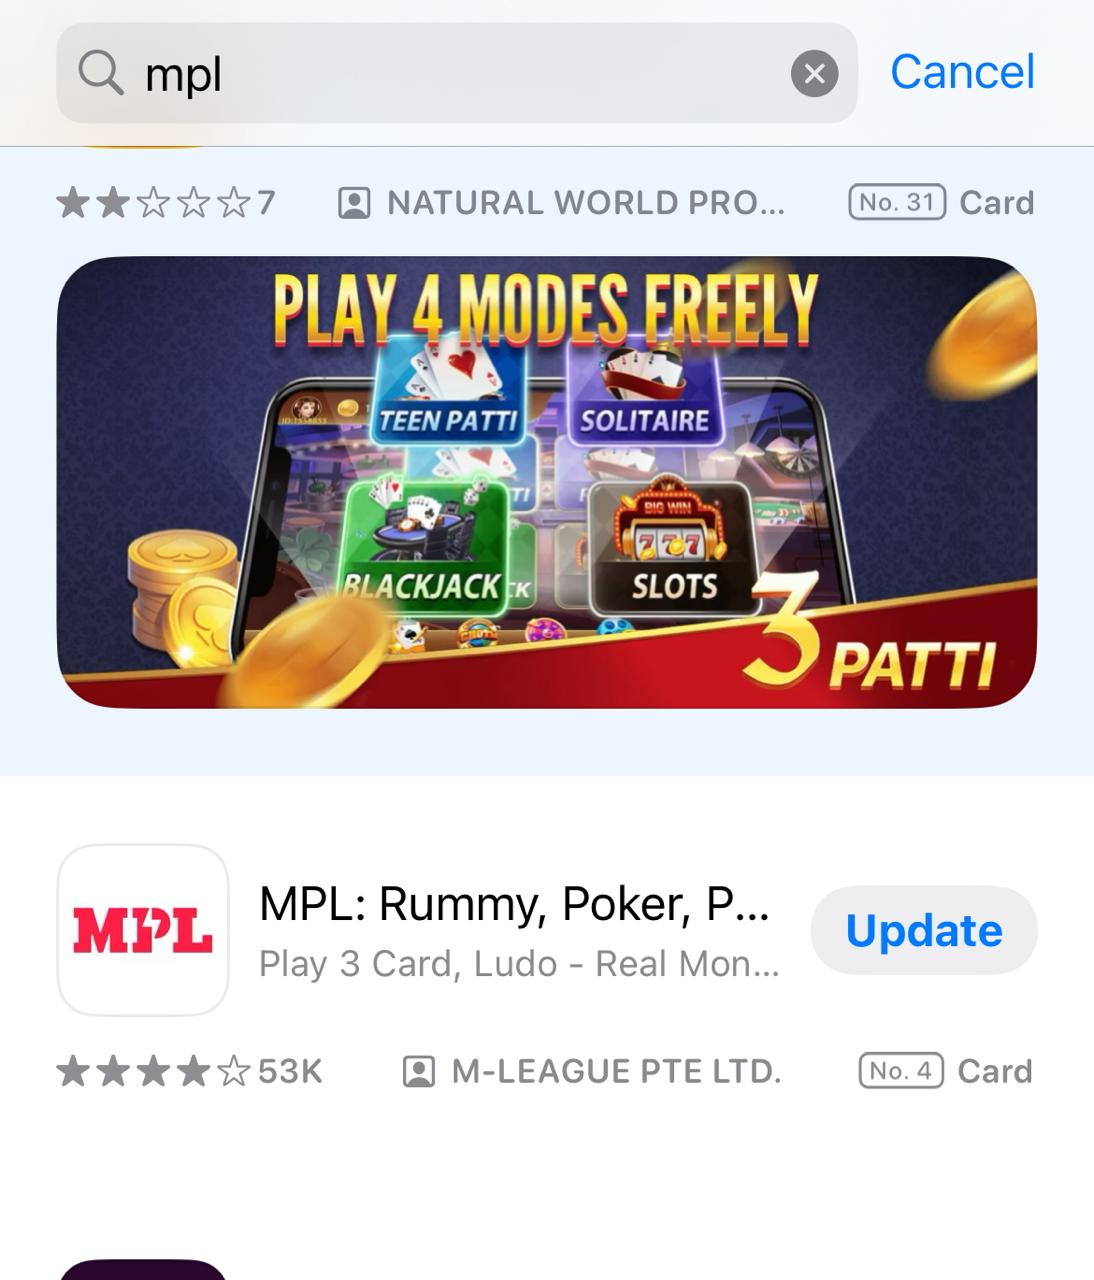 How to Download the Rummy Bo Call Break App?